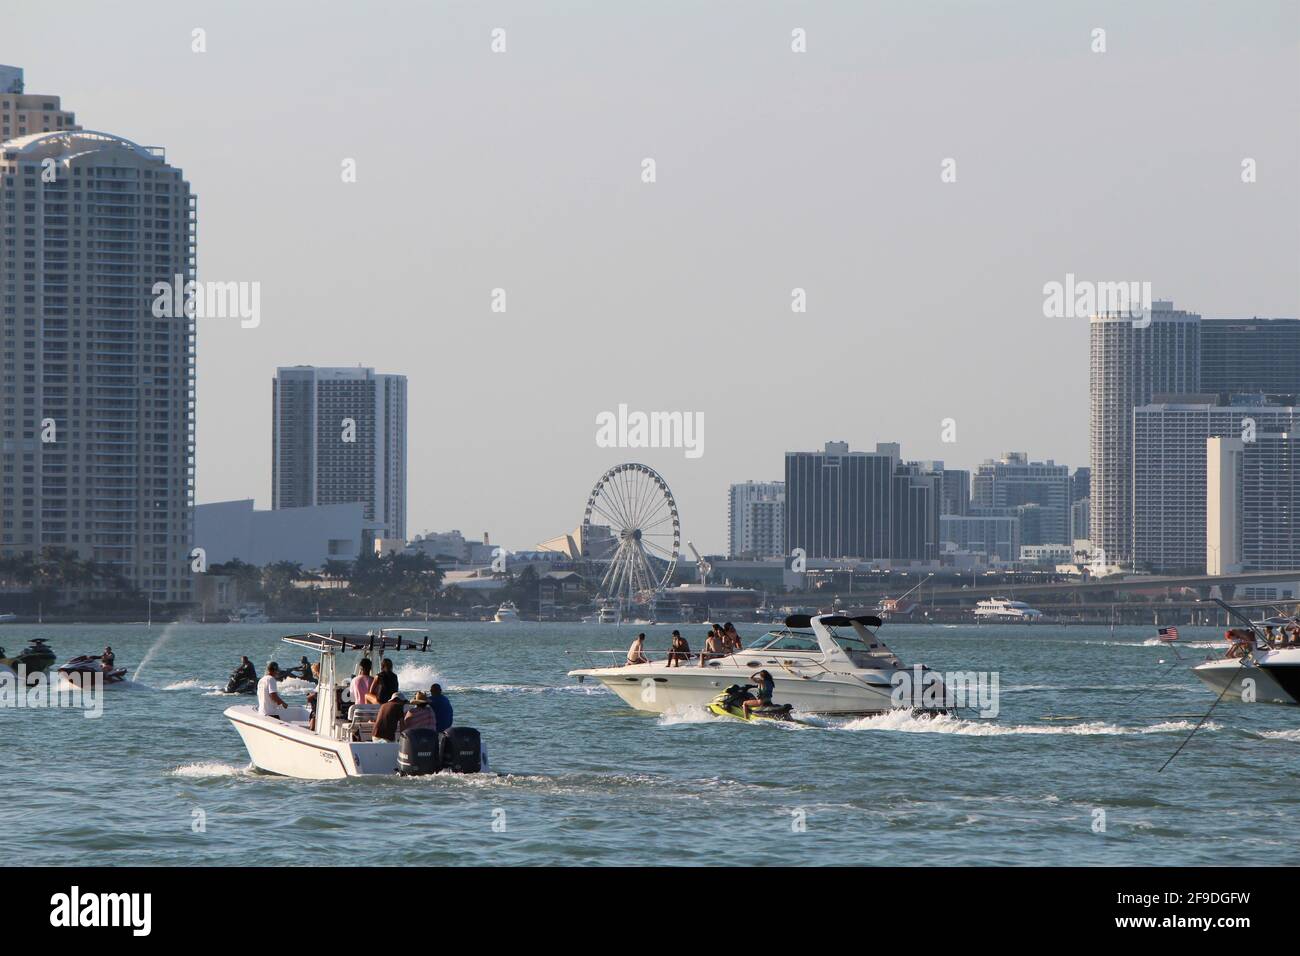 Boats traveling along Biscayne bay Brickell and Downtown Miami cityscape in the background. Boats are parking in the bay inlet to watch the sunset Stock Photo